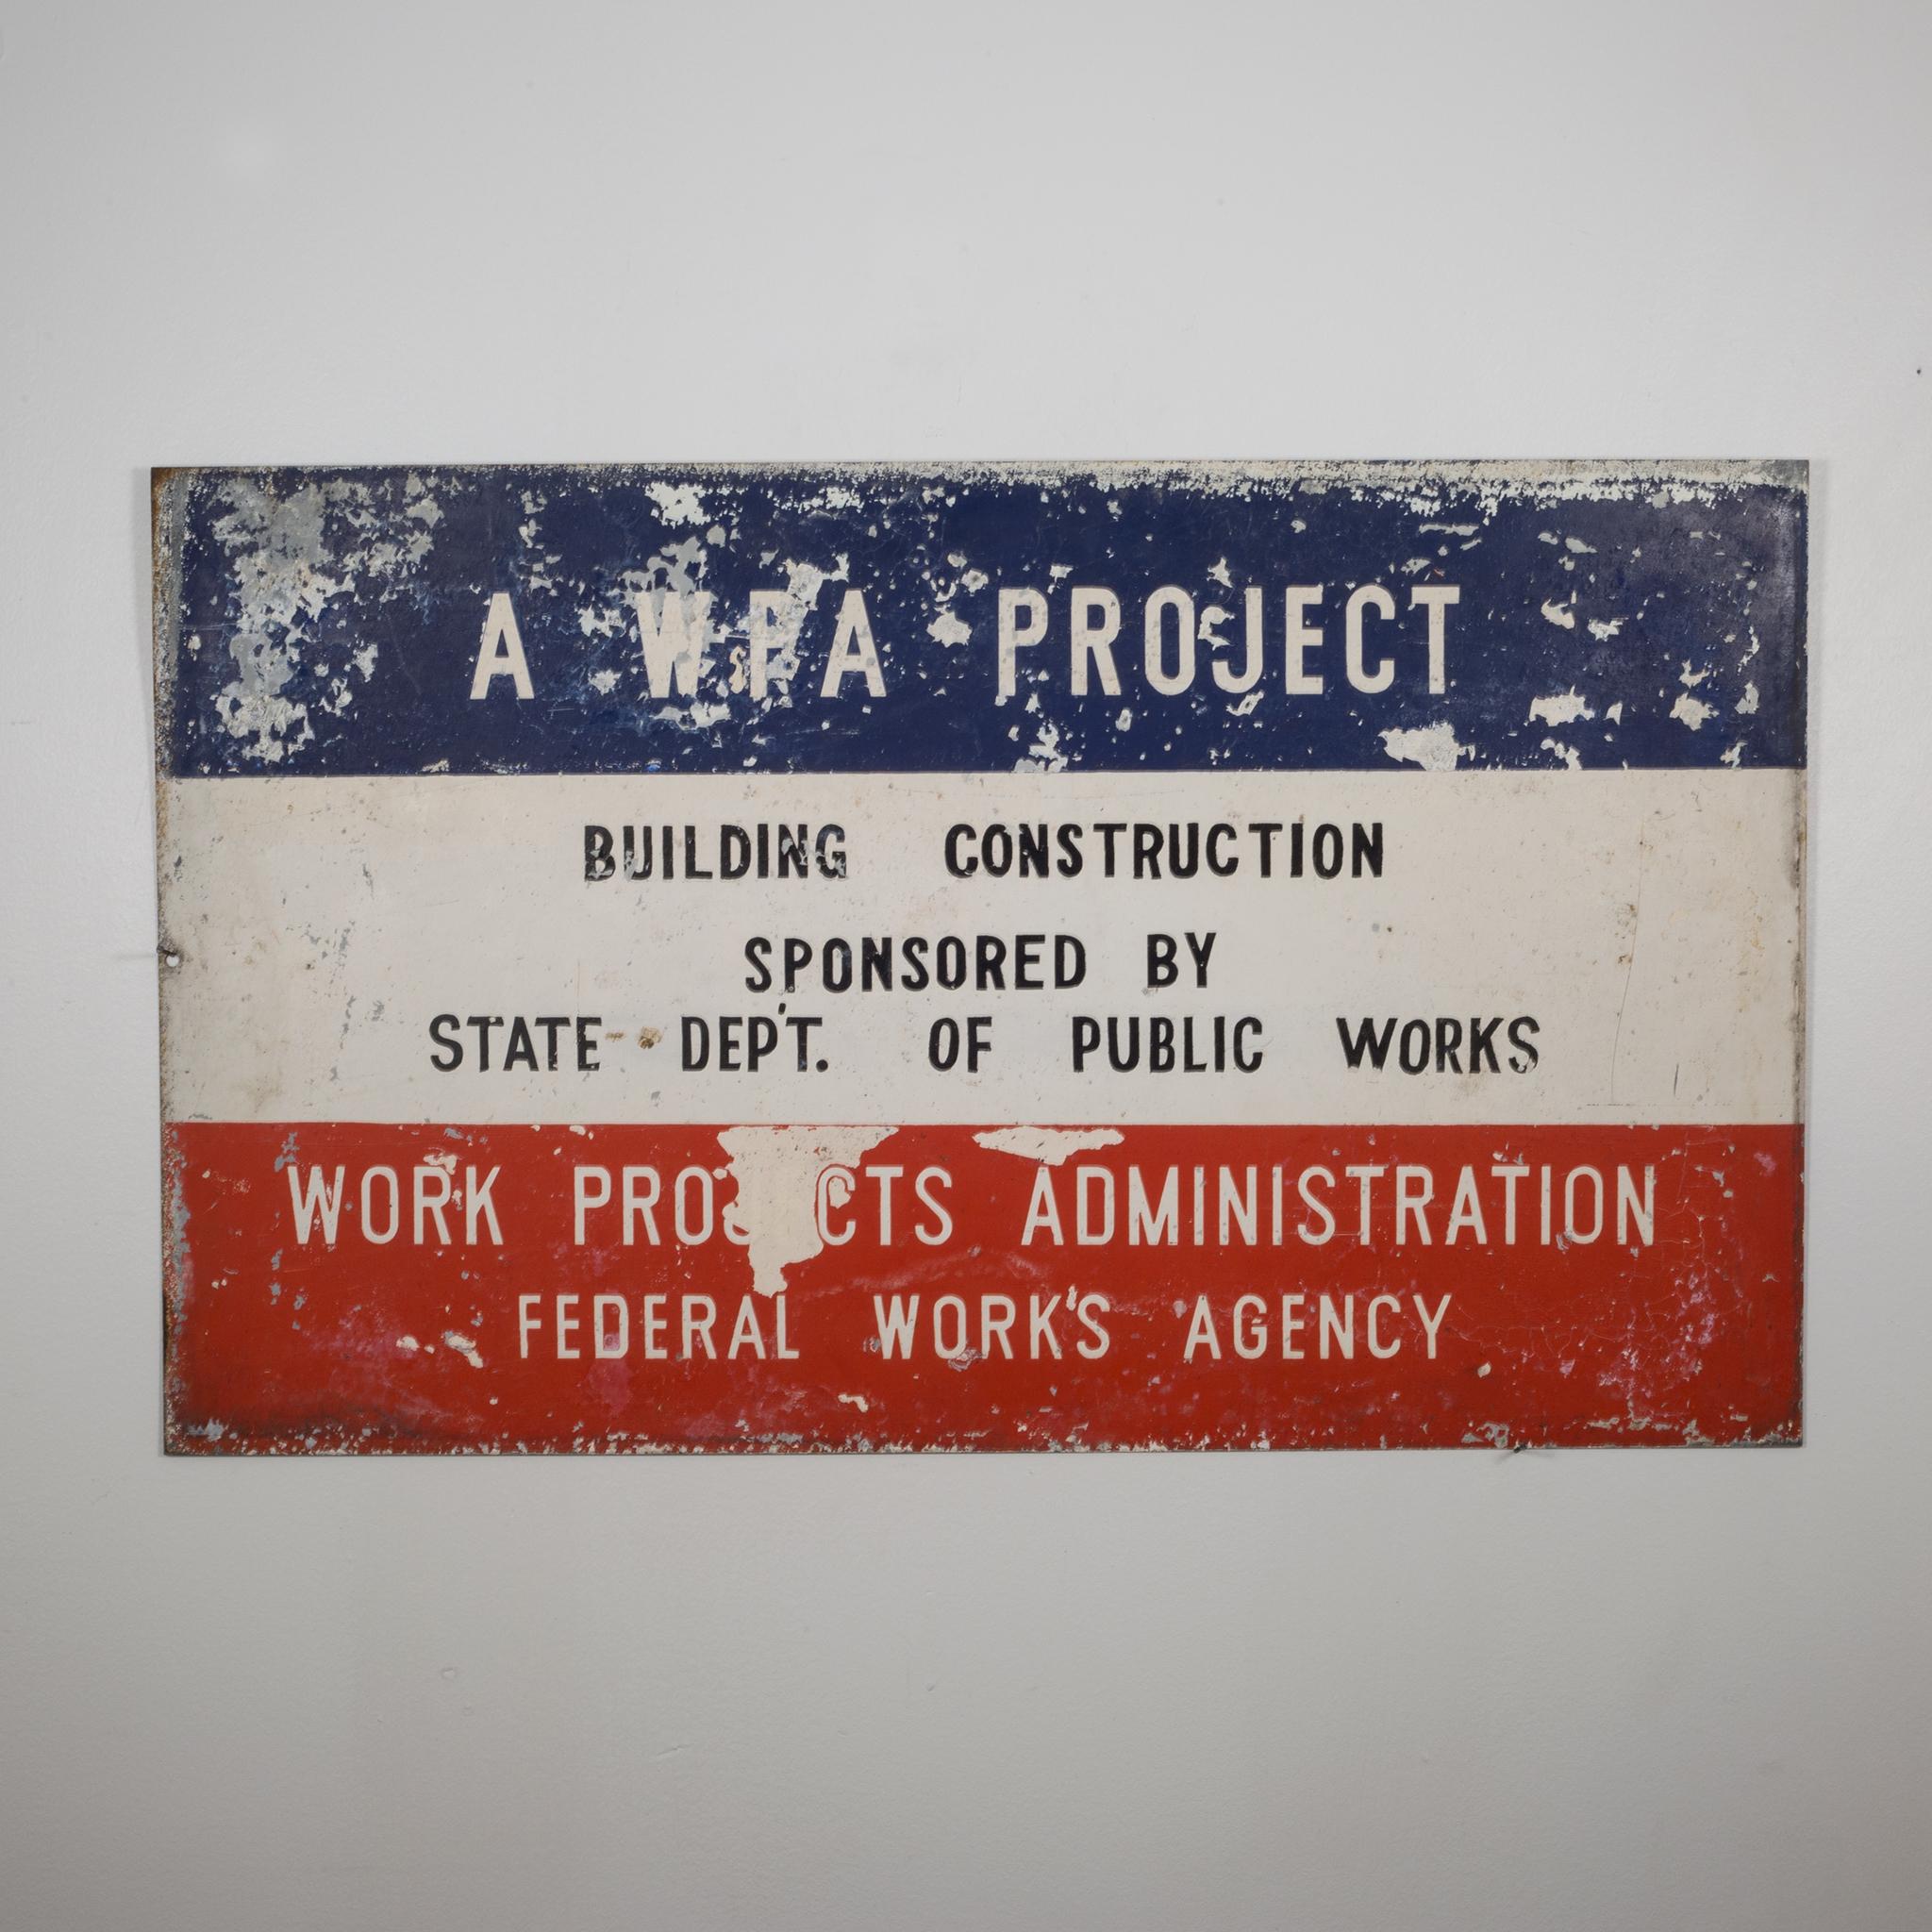 About

This is an original hand painted metal sign from the WPA from the USA. The sign is made from sheet metal and is painted in a matte paint. It reads 